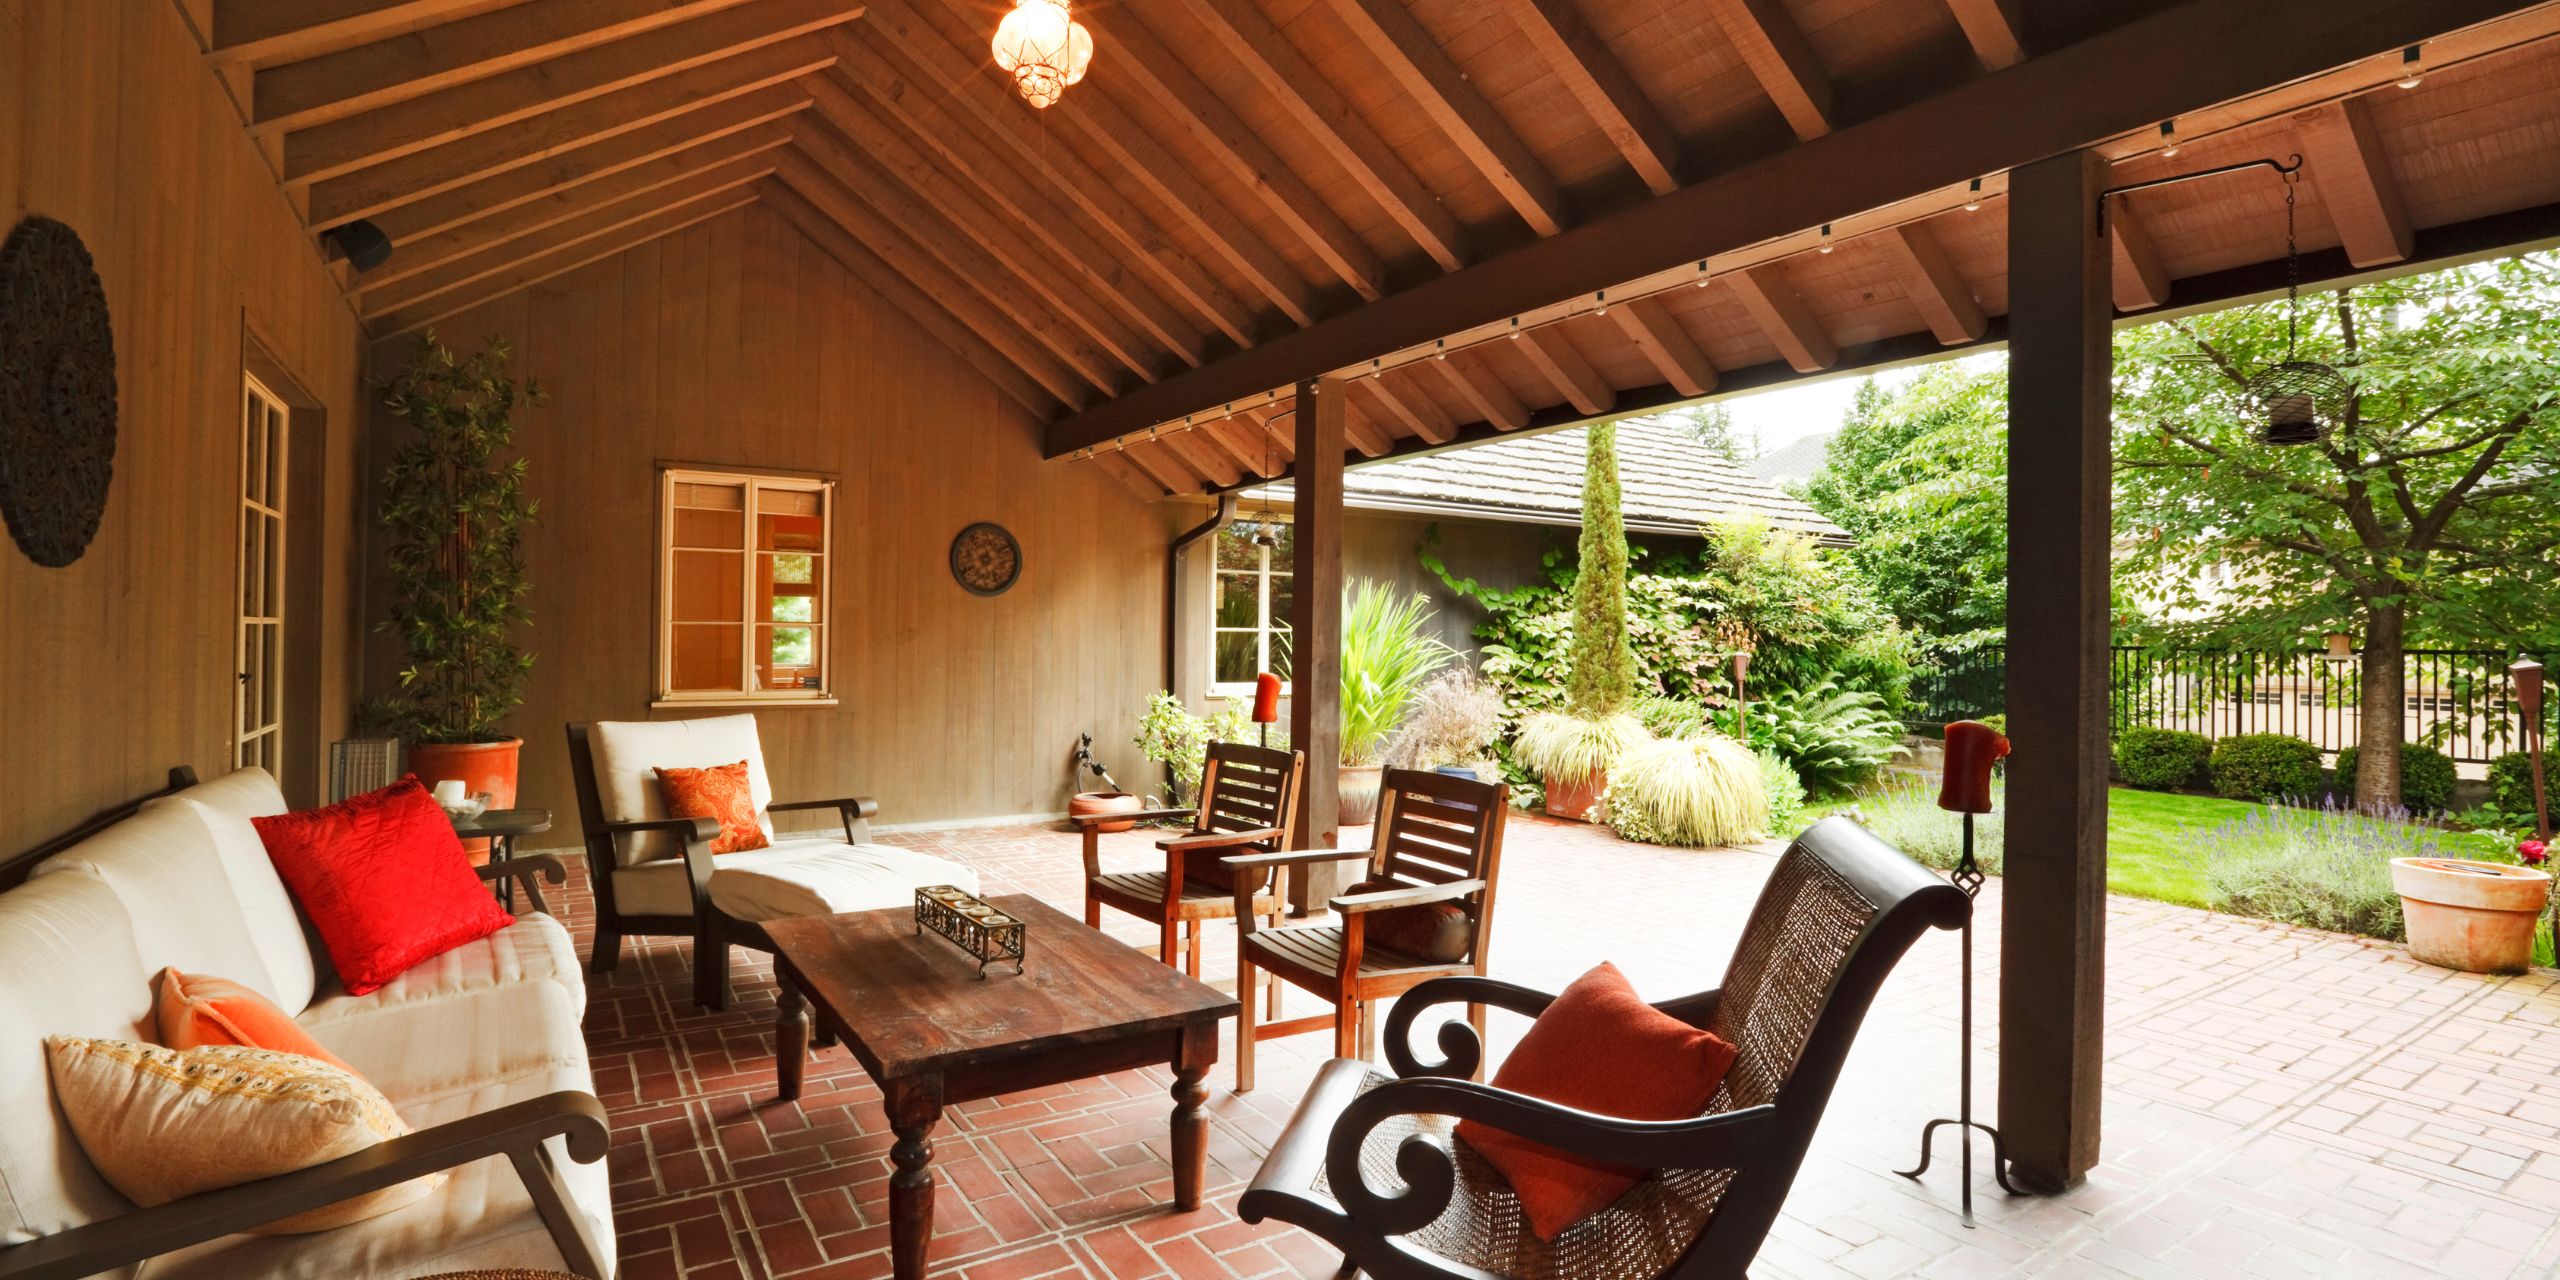 Upgrade Your Outdoor Living Space: Discover the Benefits of Patio Covers for Home Improvement